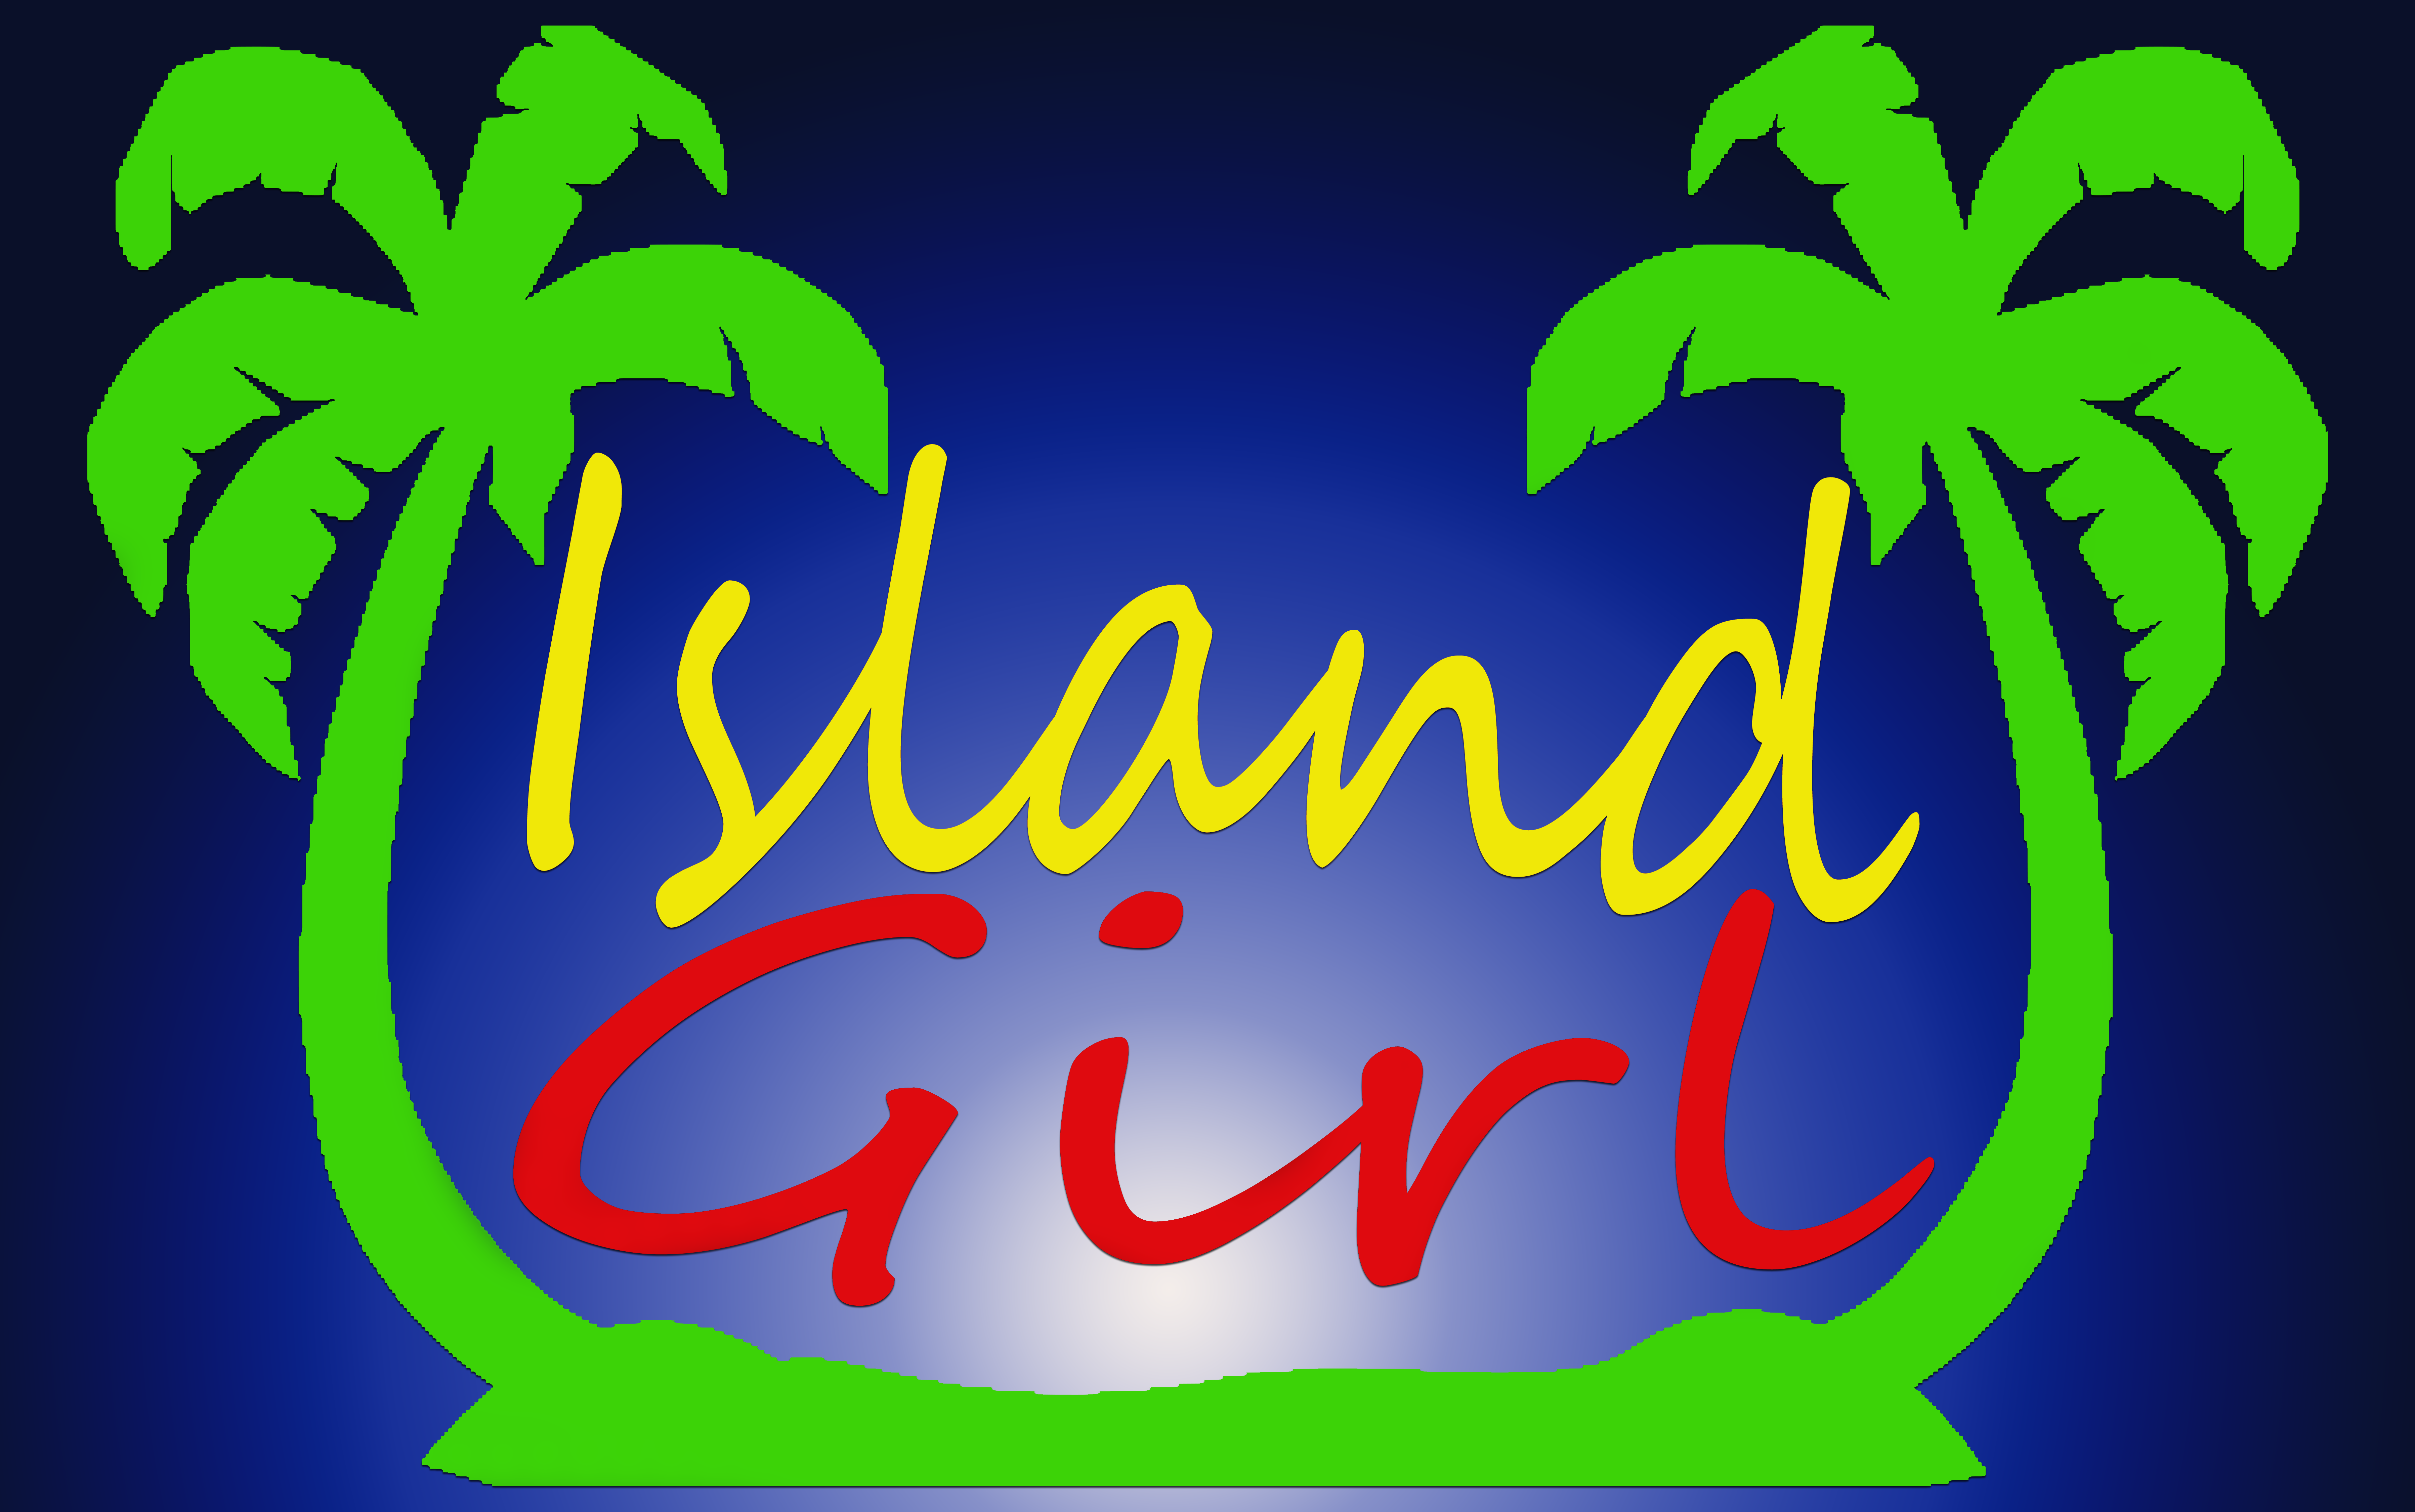 Island Girl is Bonnie Bowers. Island and world music cover act.